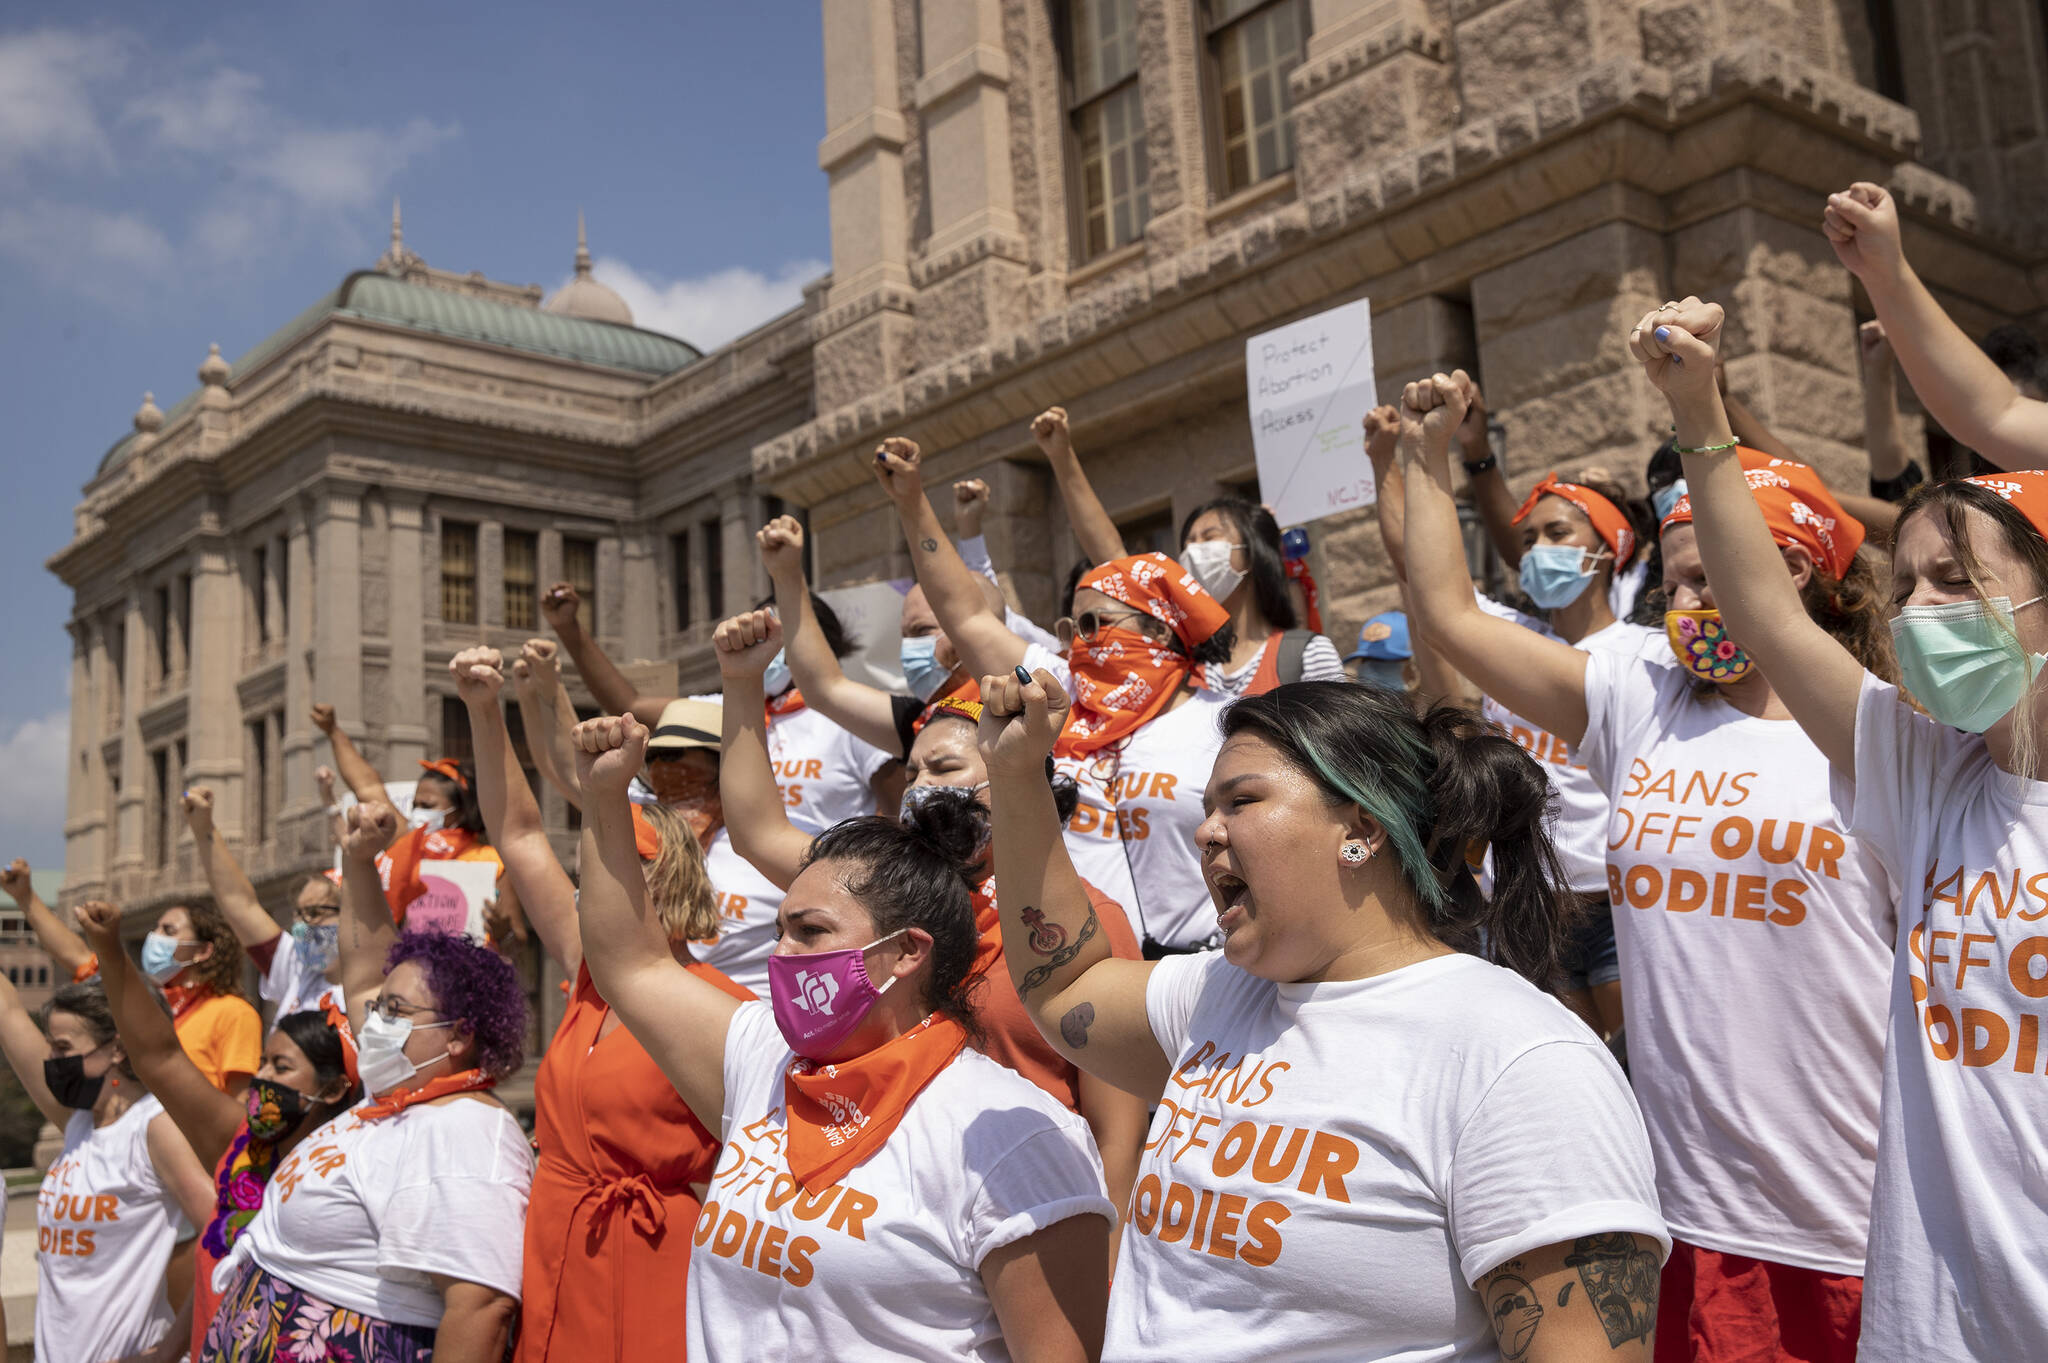 In this Sept. 1, 2021 file photo, women protest against the six-week abortion ban at the Capitol in Austin, Texas. Even before a strict abortion ban took effect in Texas this week, clinics in neighboring states were fielding more and more calls from women desperate for options. The Texas law, allowed to stand in a decision Thursday, Sept. 2, 2021 by the U.S. Supreme Court, bans abortions after a fetal heartbeat can be detected, typically around six weeks. (Jay Janner/Austin American-Statesman via AP File)